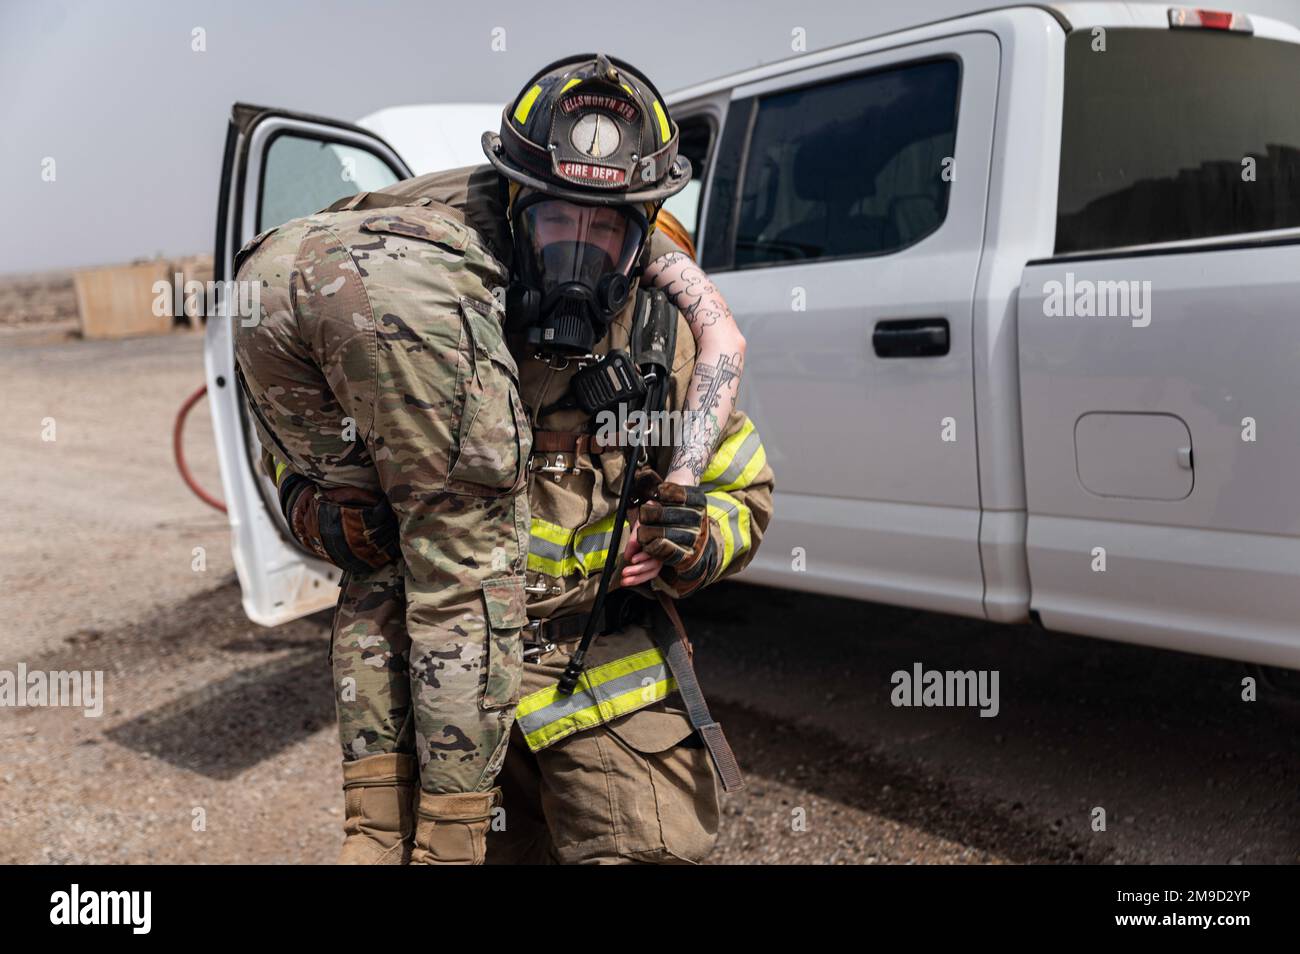 A U.S. Air Force fire protection specialist with the 776th Expeditionary Air Base Squadron (EABS) removes a simulated injured patient from a vehicle at Chabelley Airfield, Djibouti, May 16, 2022. The joint readiness training conducted by the 776th EABS and U.S. Army medics from the 2nd Squadron, 183rd Cavalry Regiment, served as their annual inspection where they responded to a simulated vehicle fire with injuries. Stock Photo